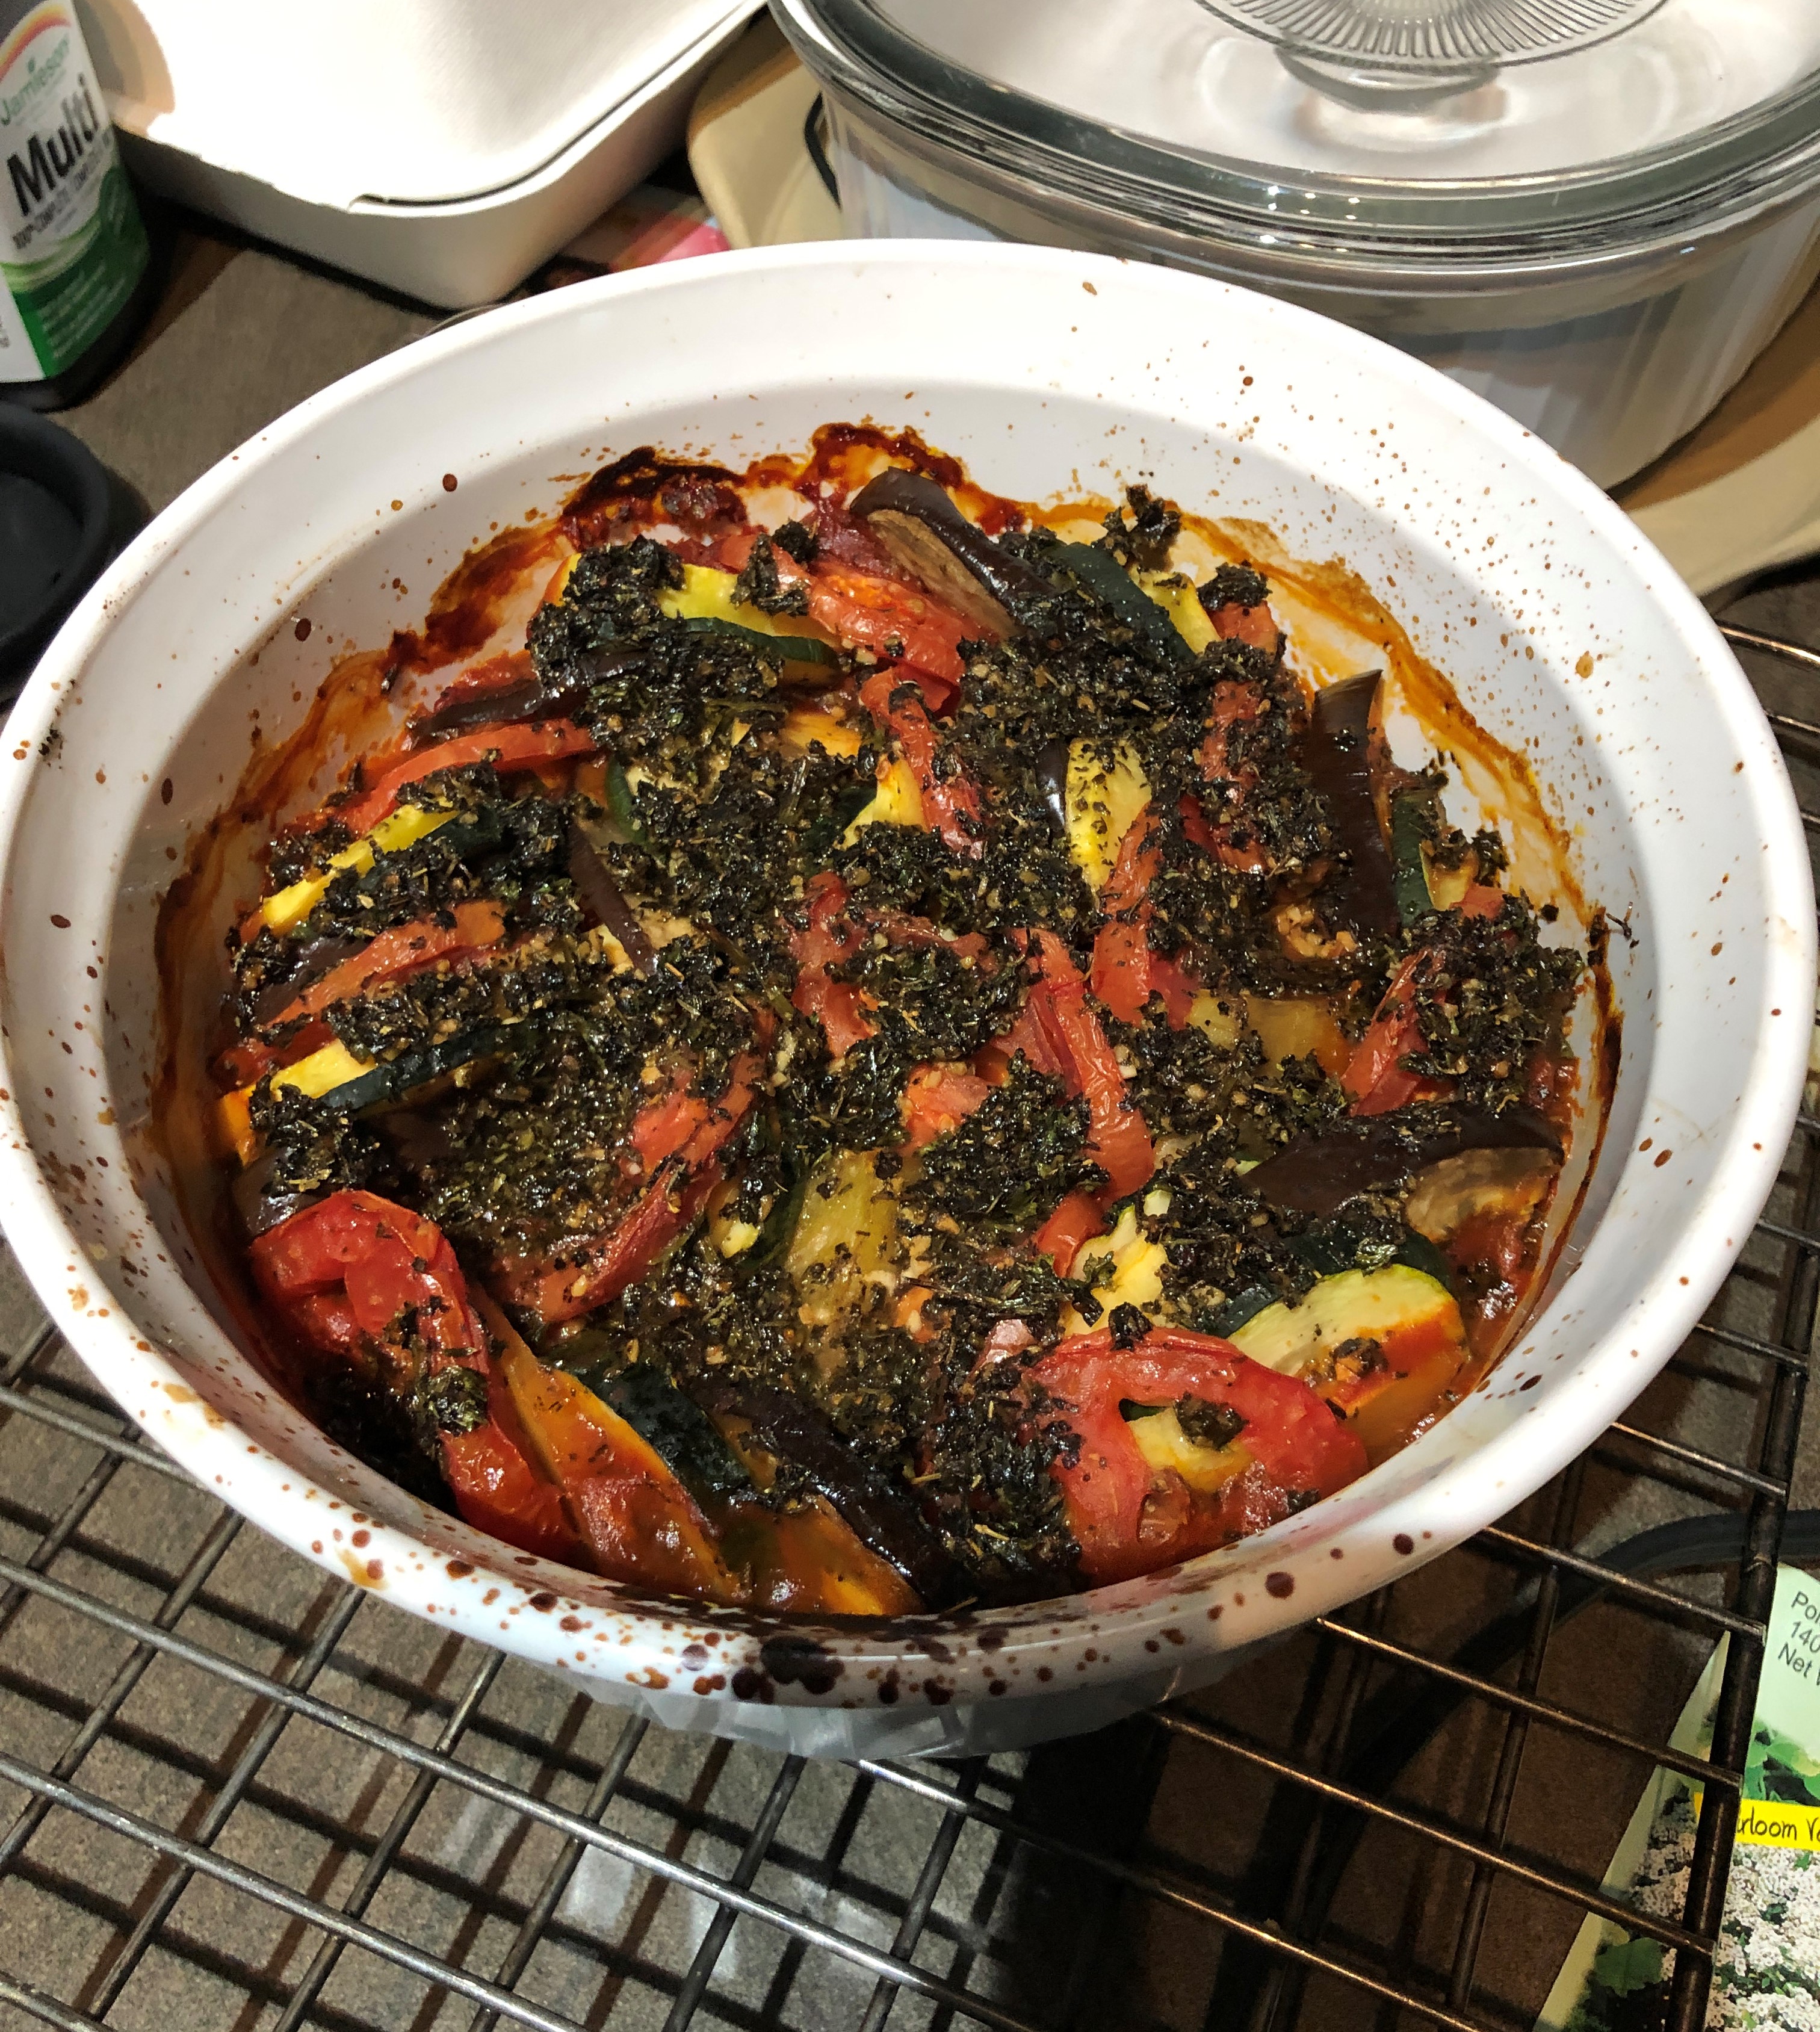 home made ratatouille (vegetable dish) in a white pot